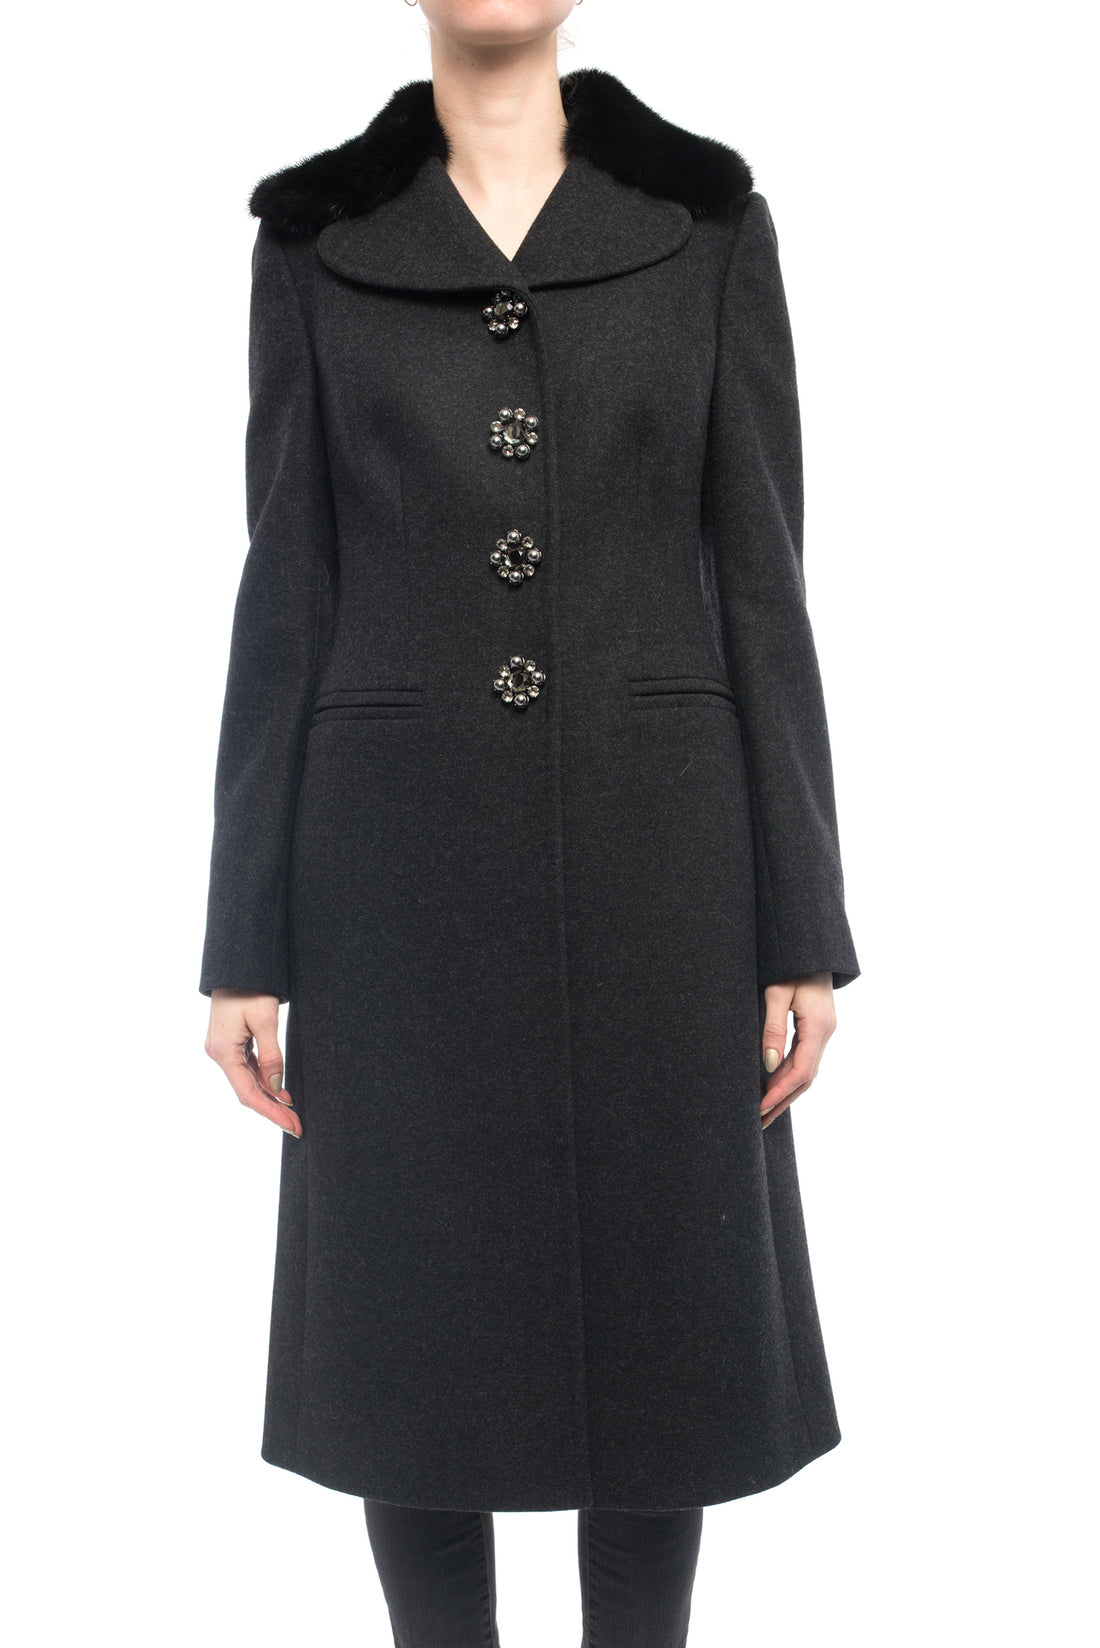 Dolce & Gabbana Charcoal Grey Mink Collar Wool Coat with Jewel Buttons - S